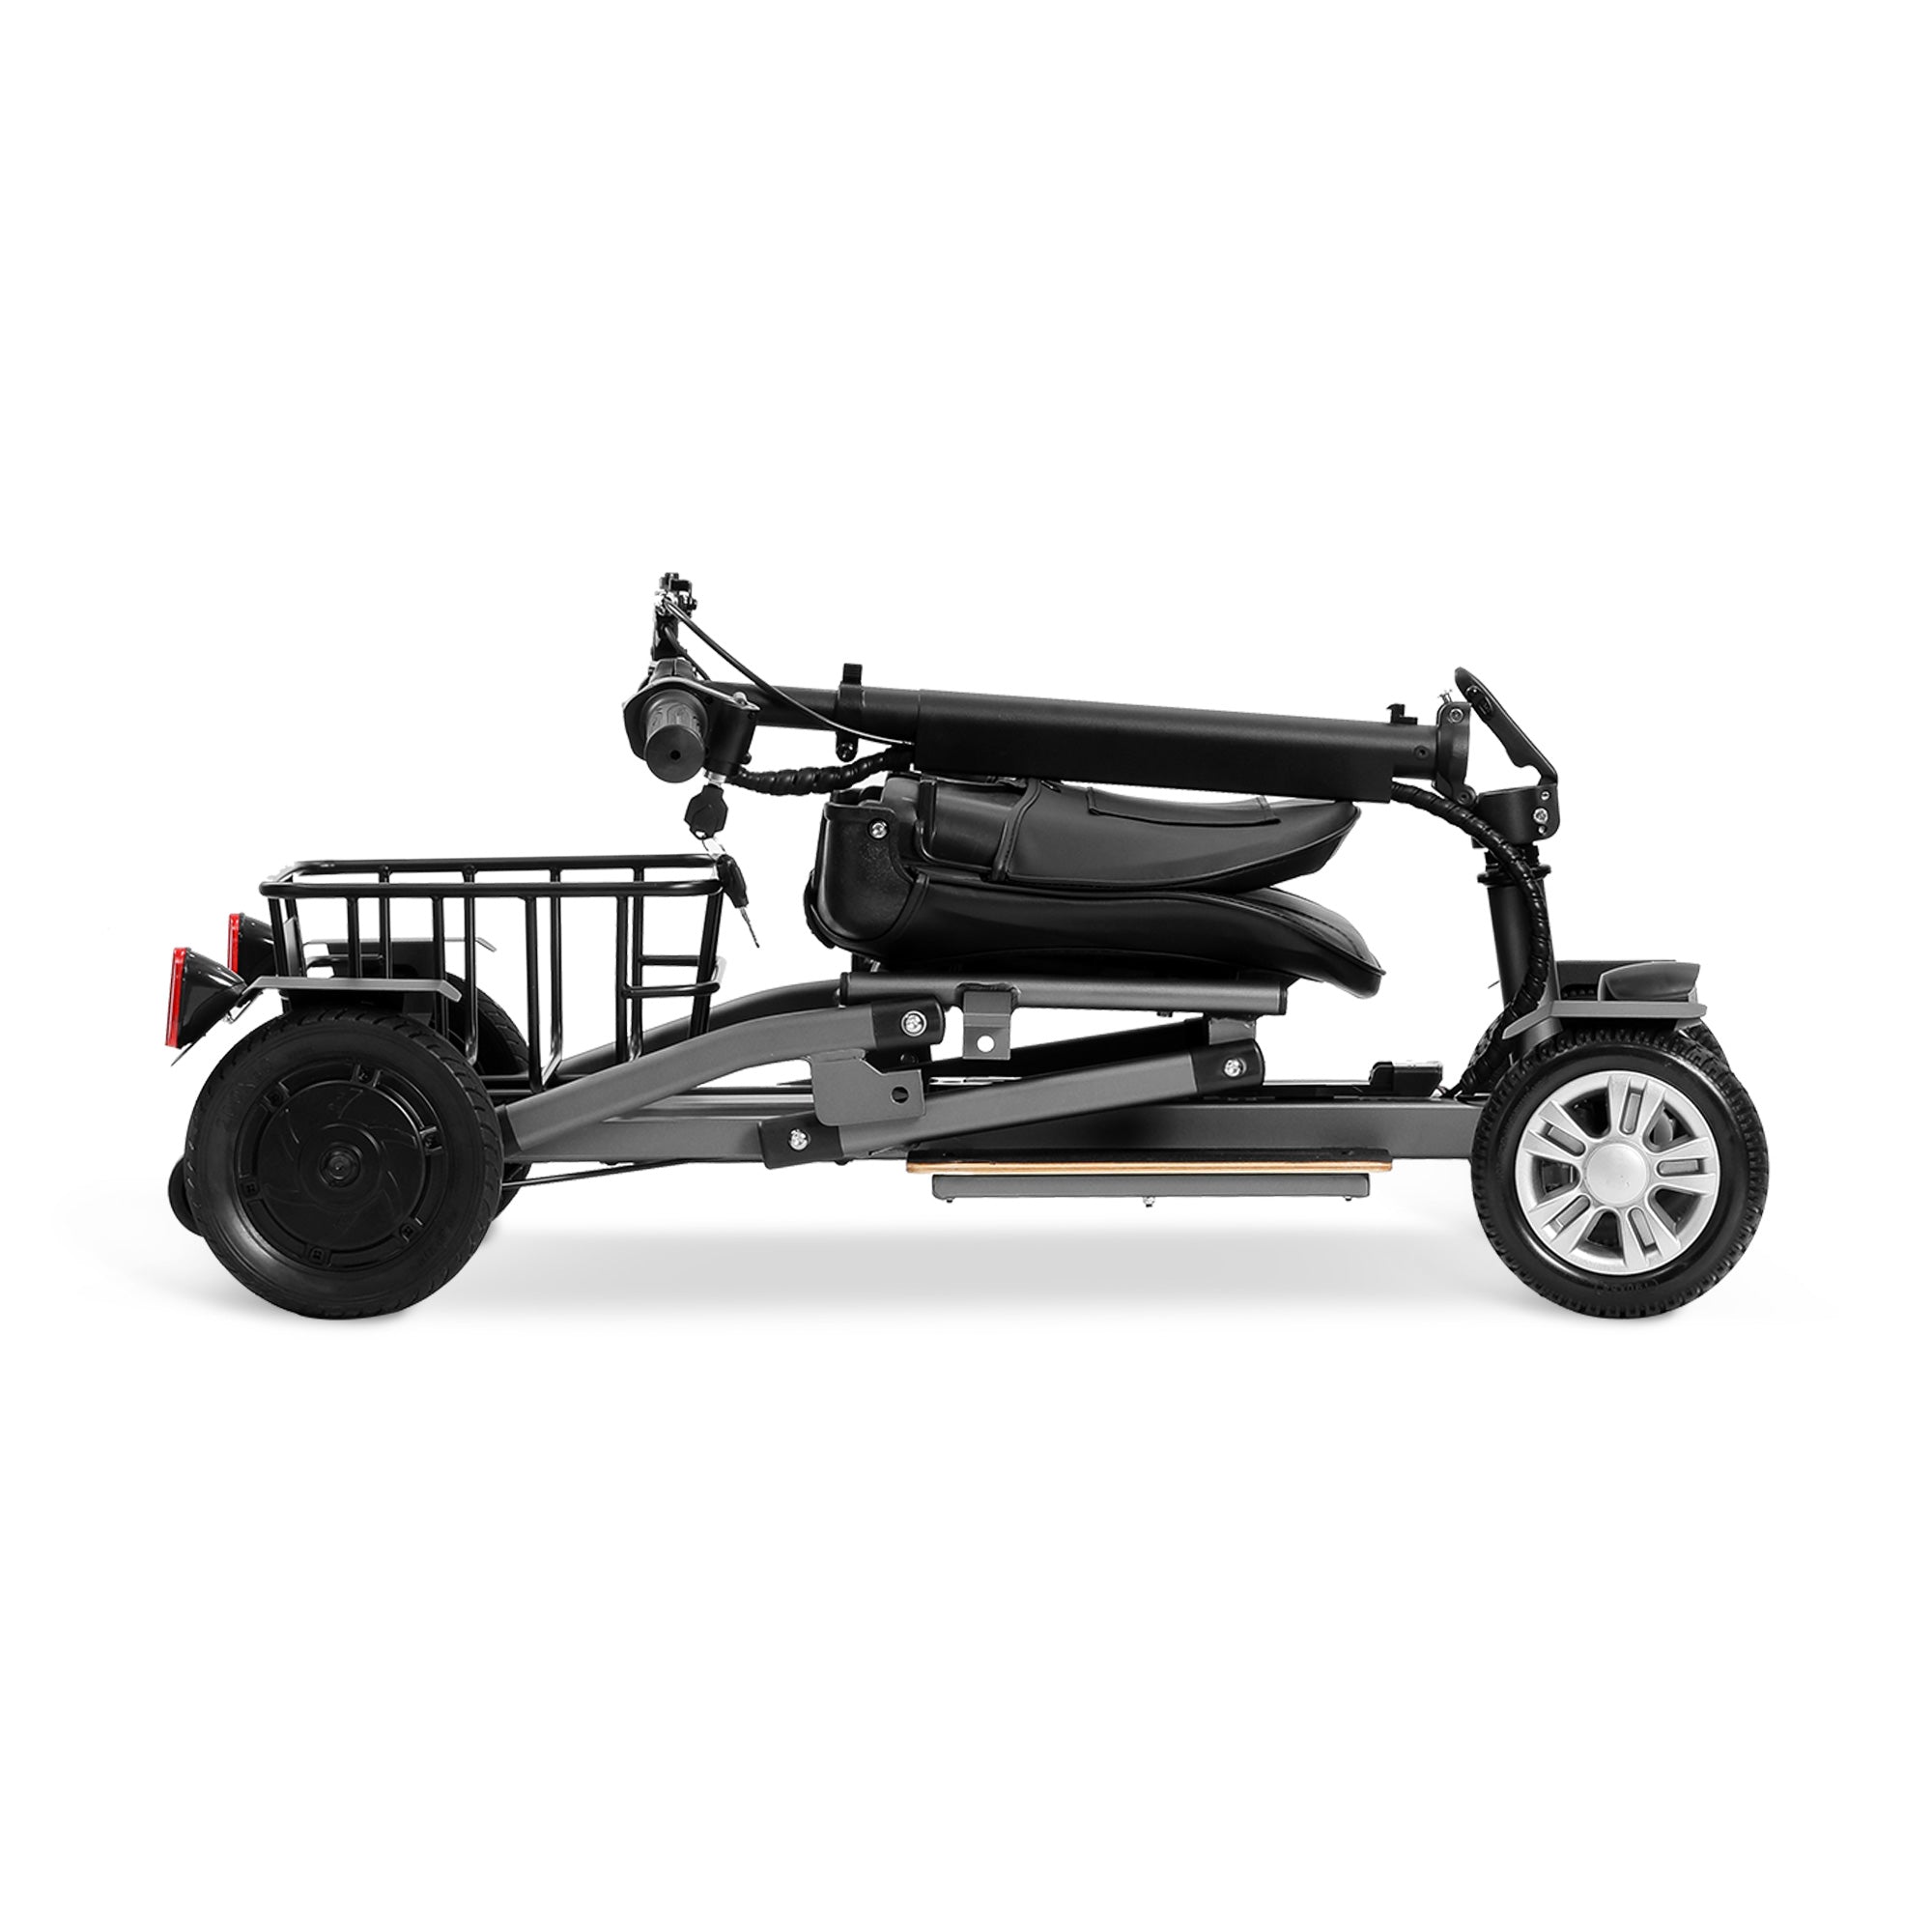 Rubicon FX04 - Lightweight Foldable Mobility Scooters